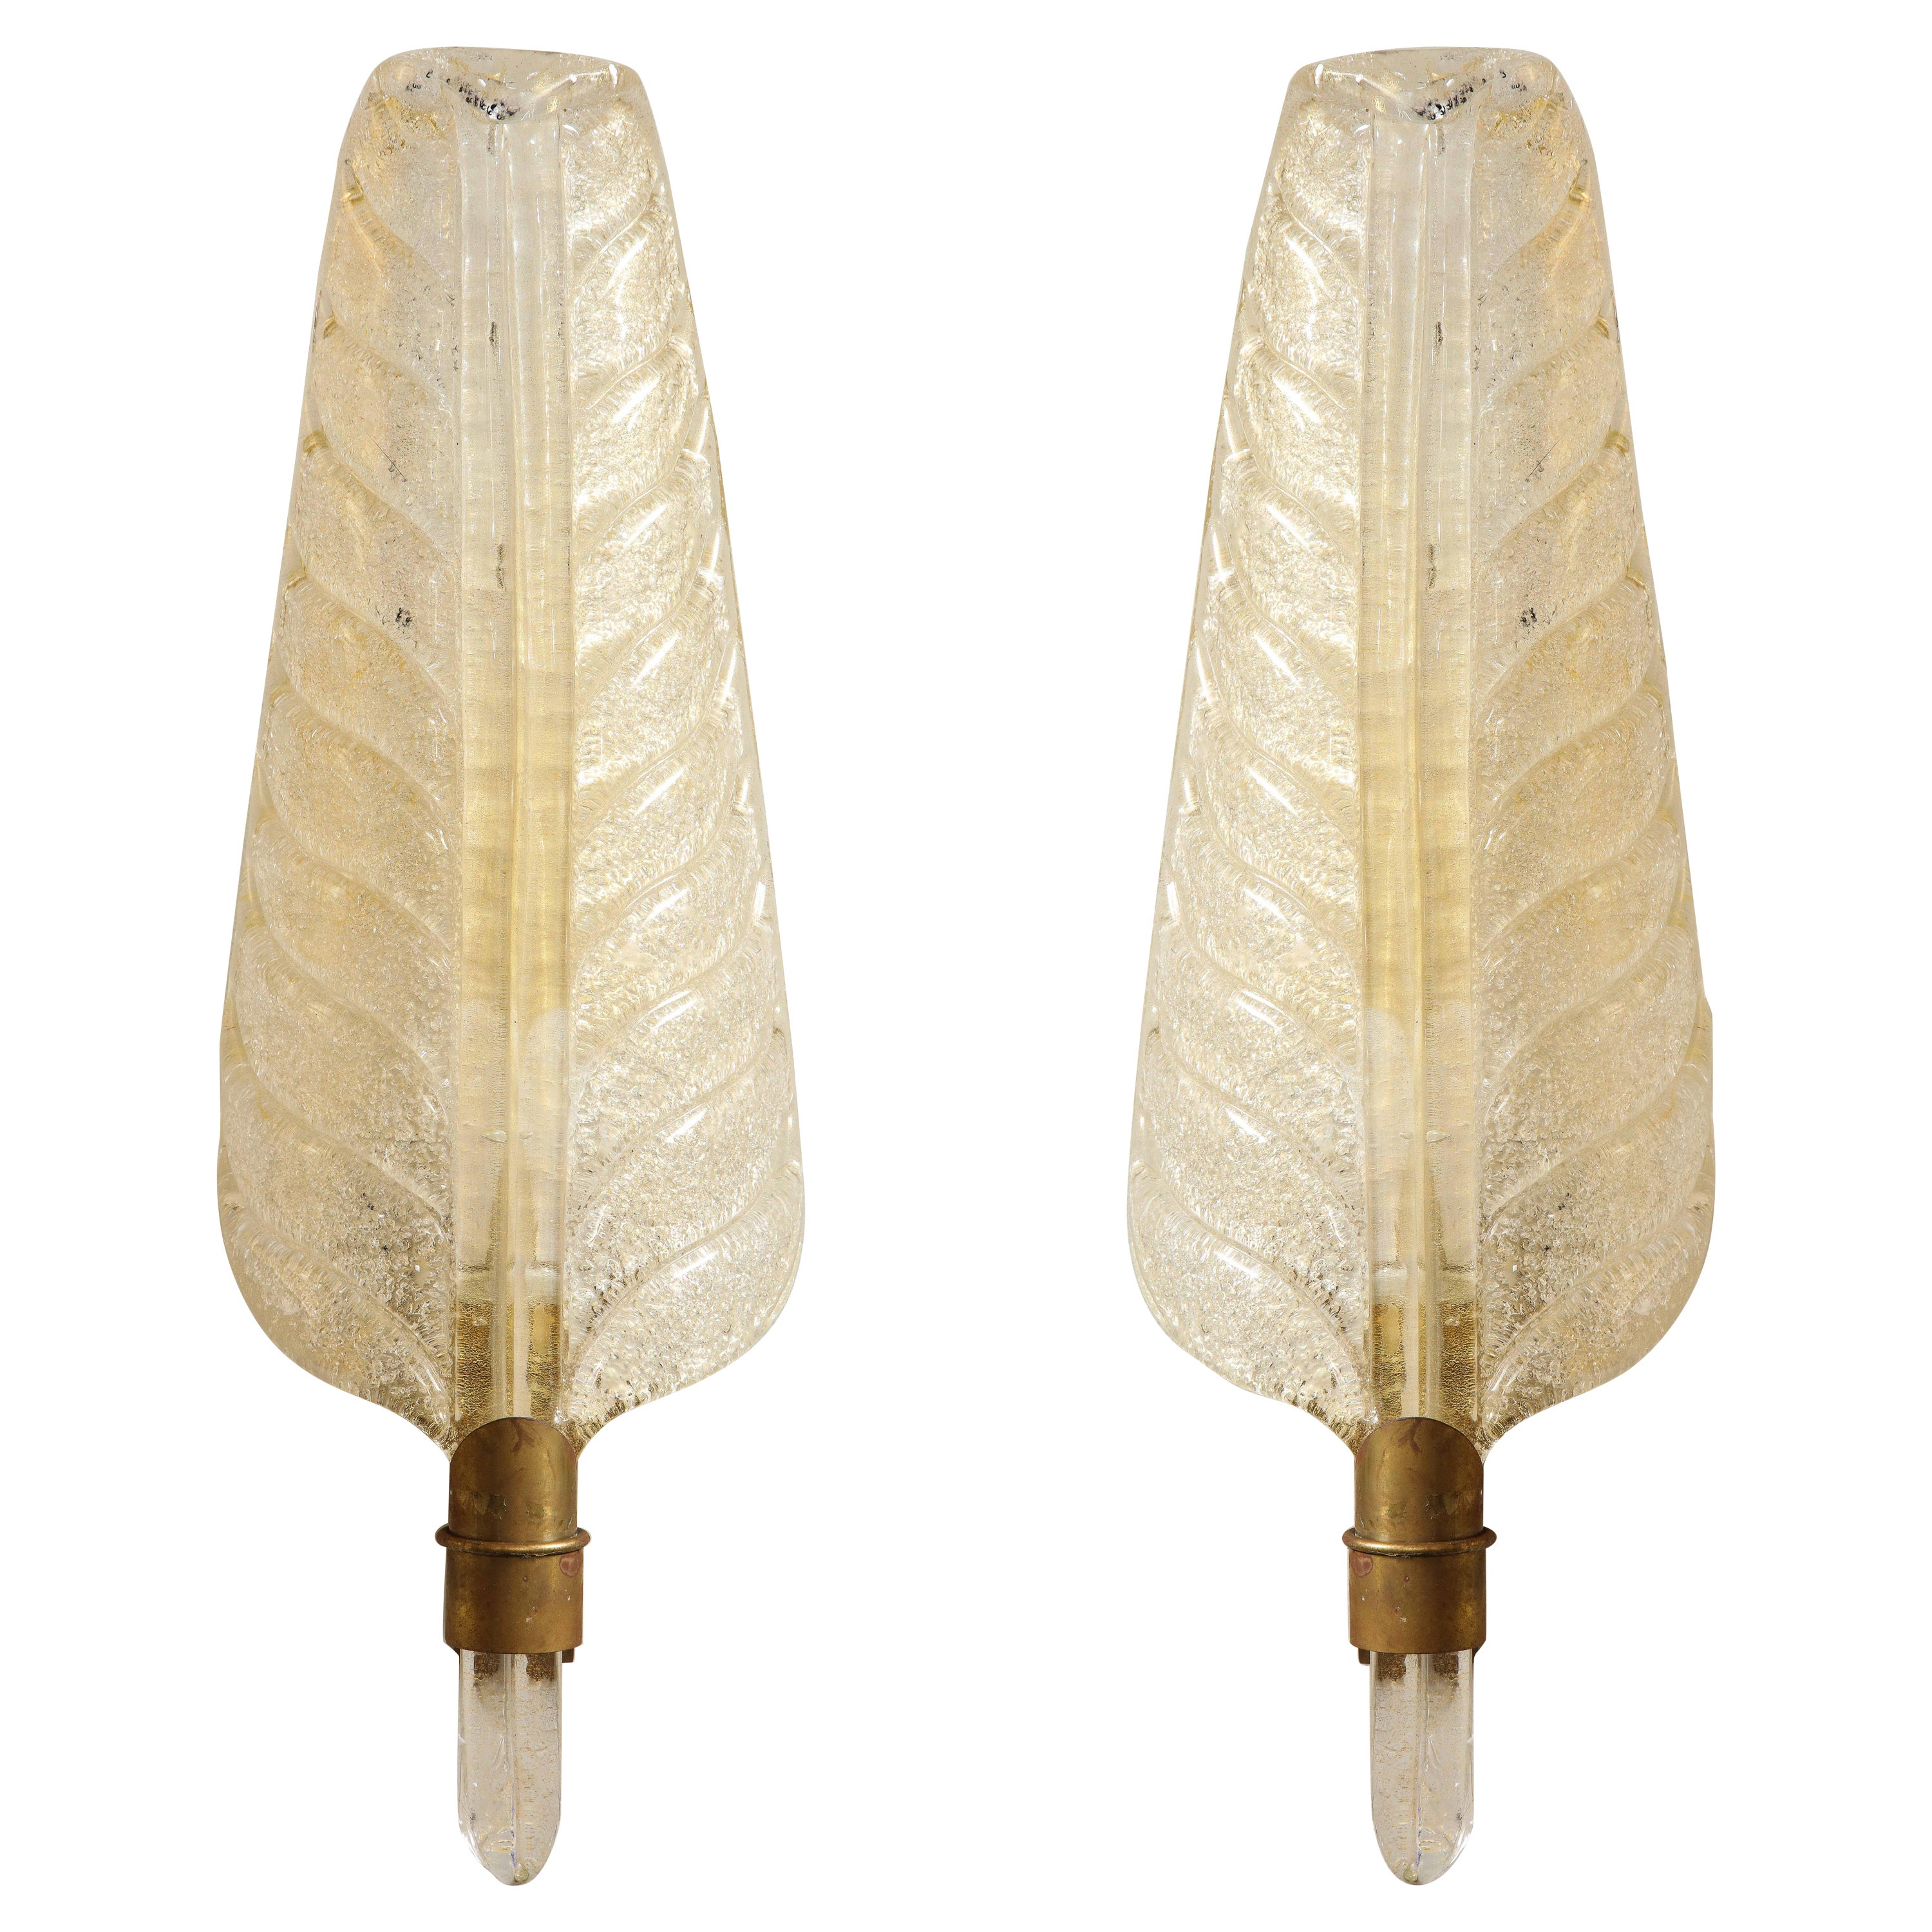 1950s Elegant Vintage Barovier Gold Incrusted Murano Glass Feather Wall Sconces